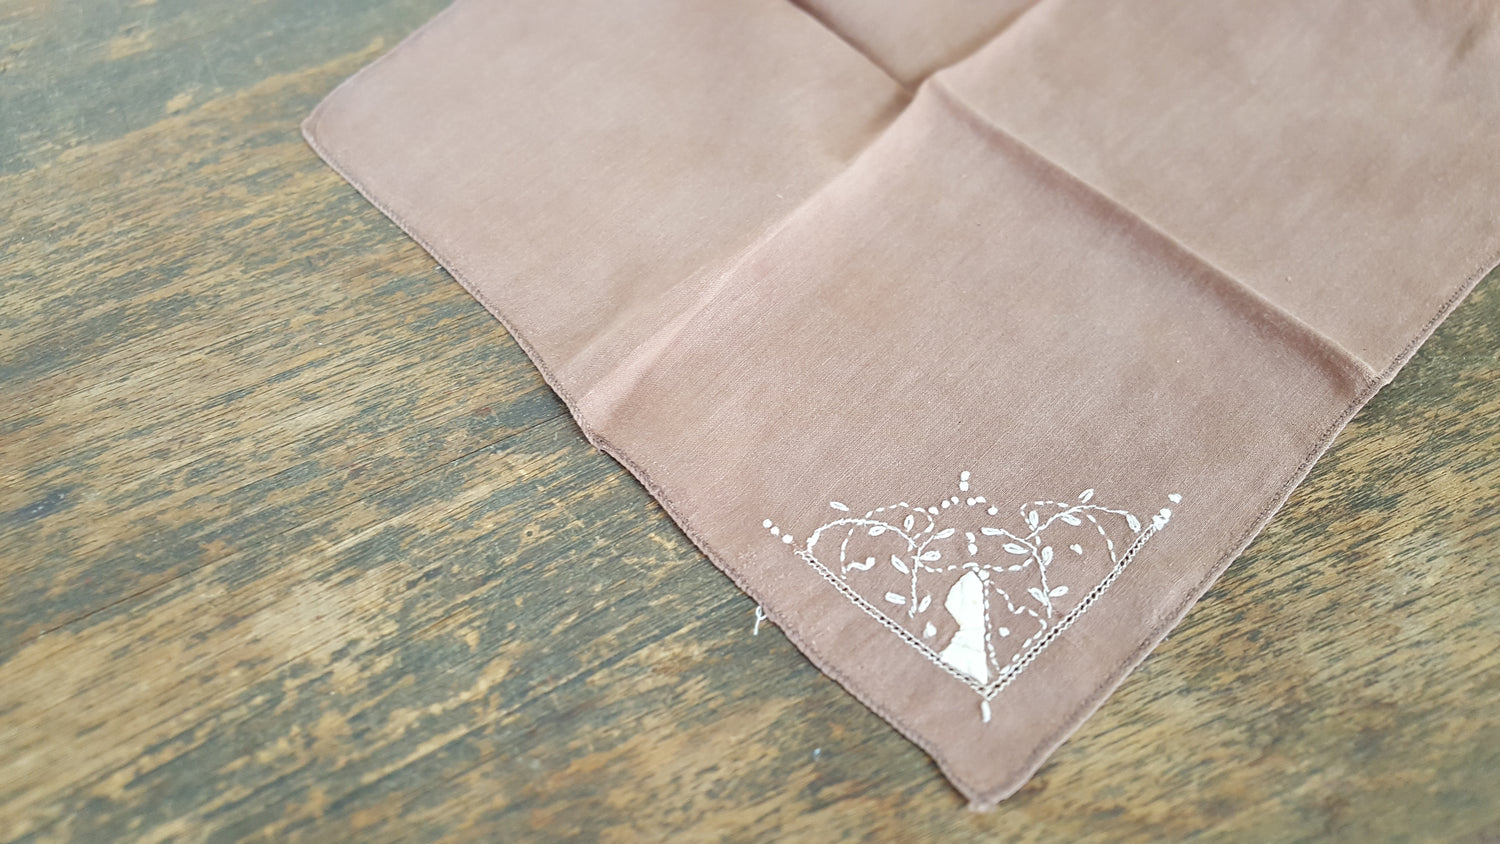 Vintage Handkerchief In Brown Cotton Embroidered With White Vines And Leaves